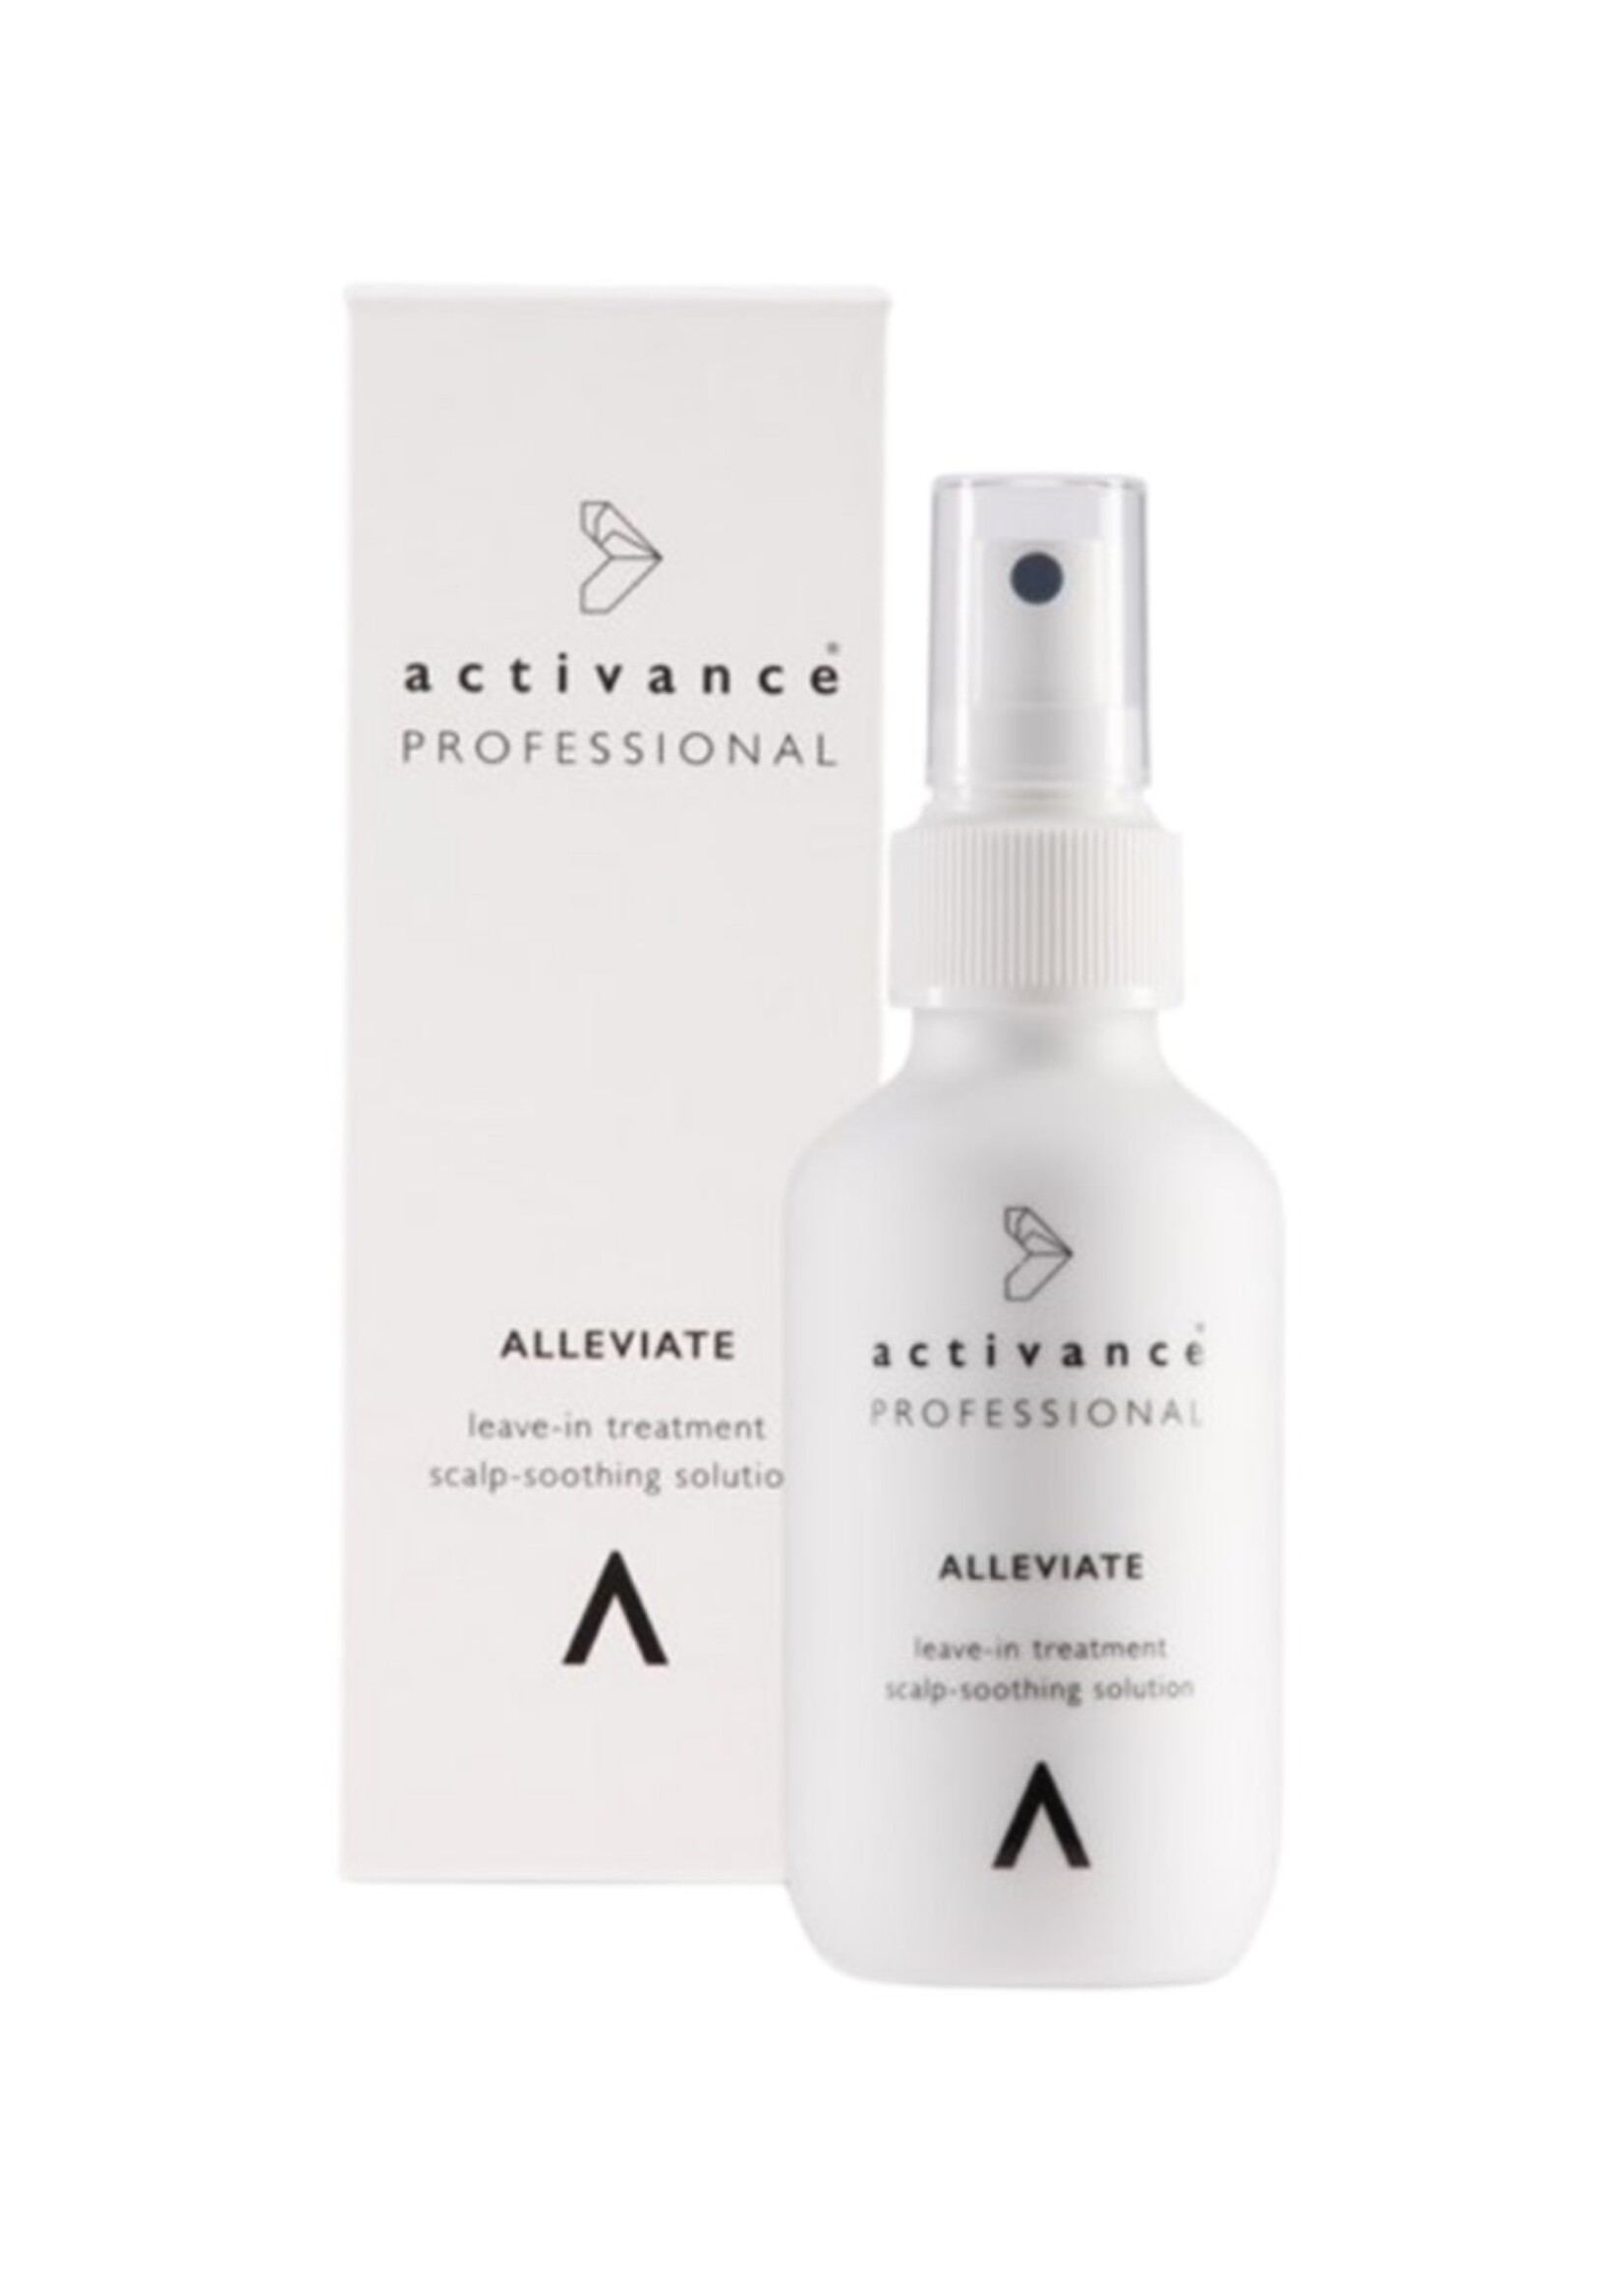 Activance Professional Activance Professional Alleviate Leave-in Treatment 100ml